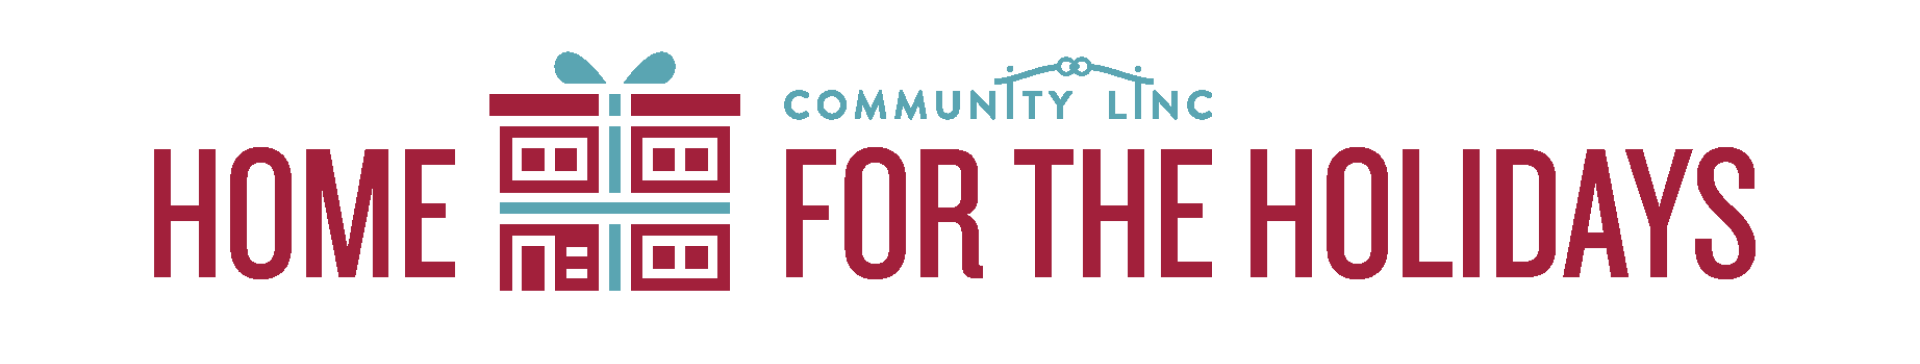 Community Linc Home For The Holidays